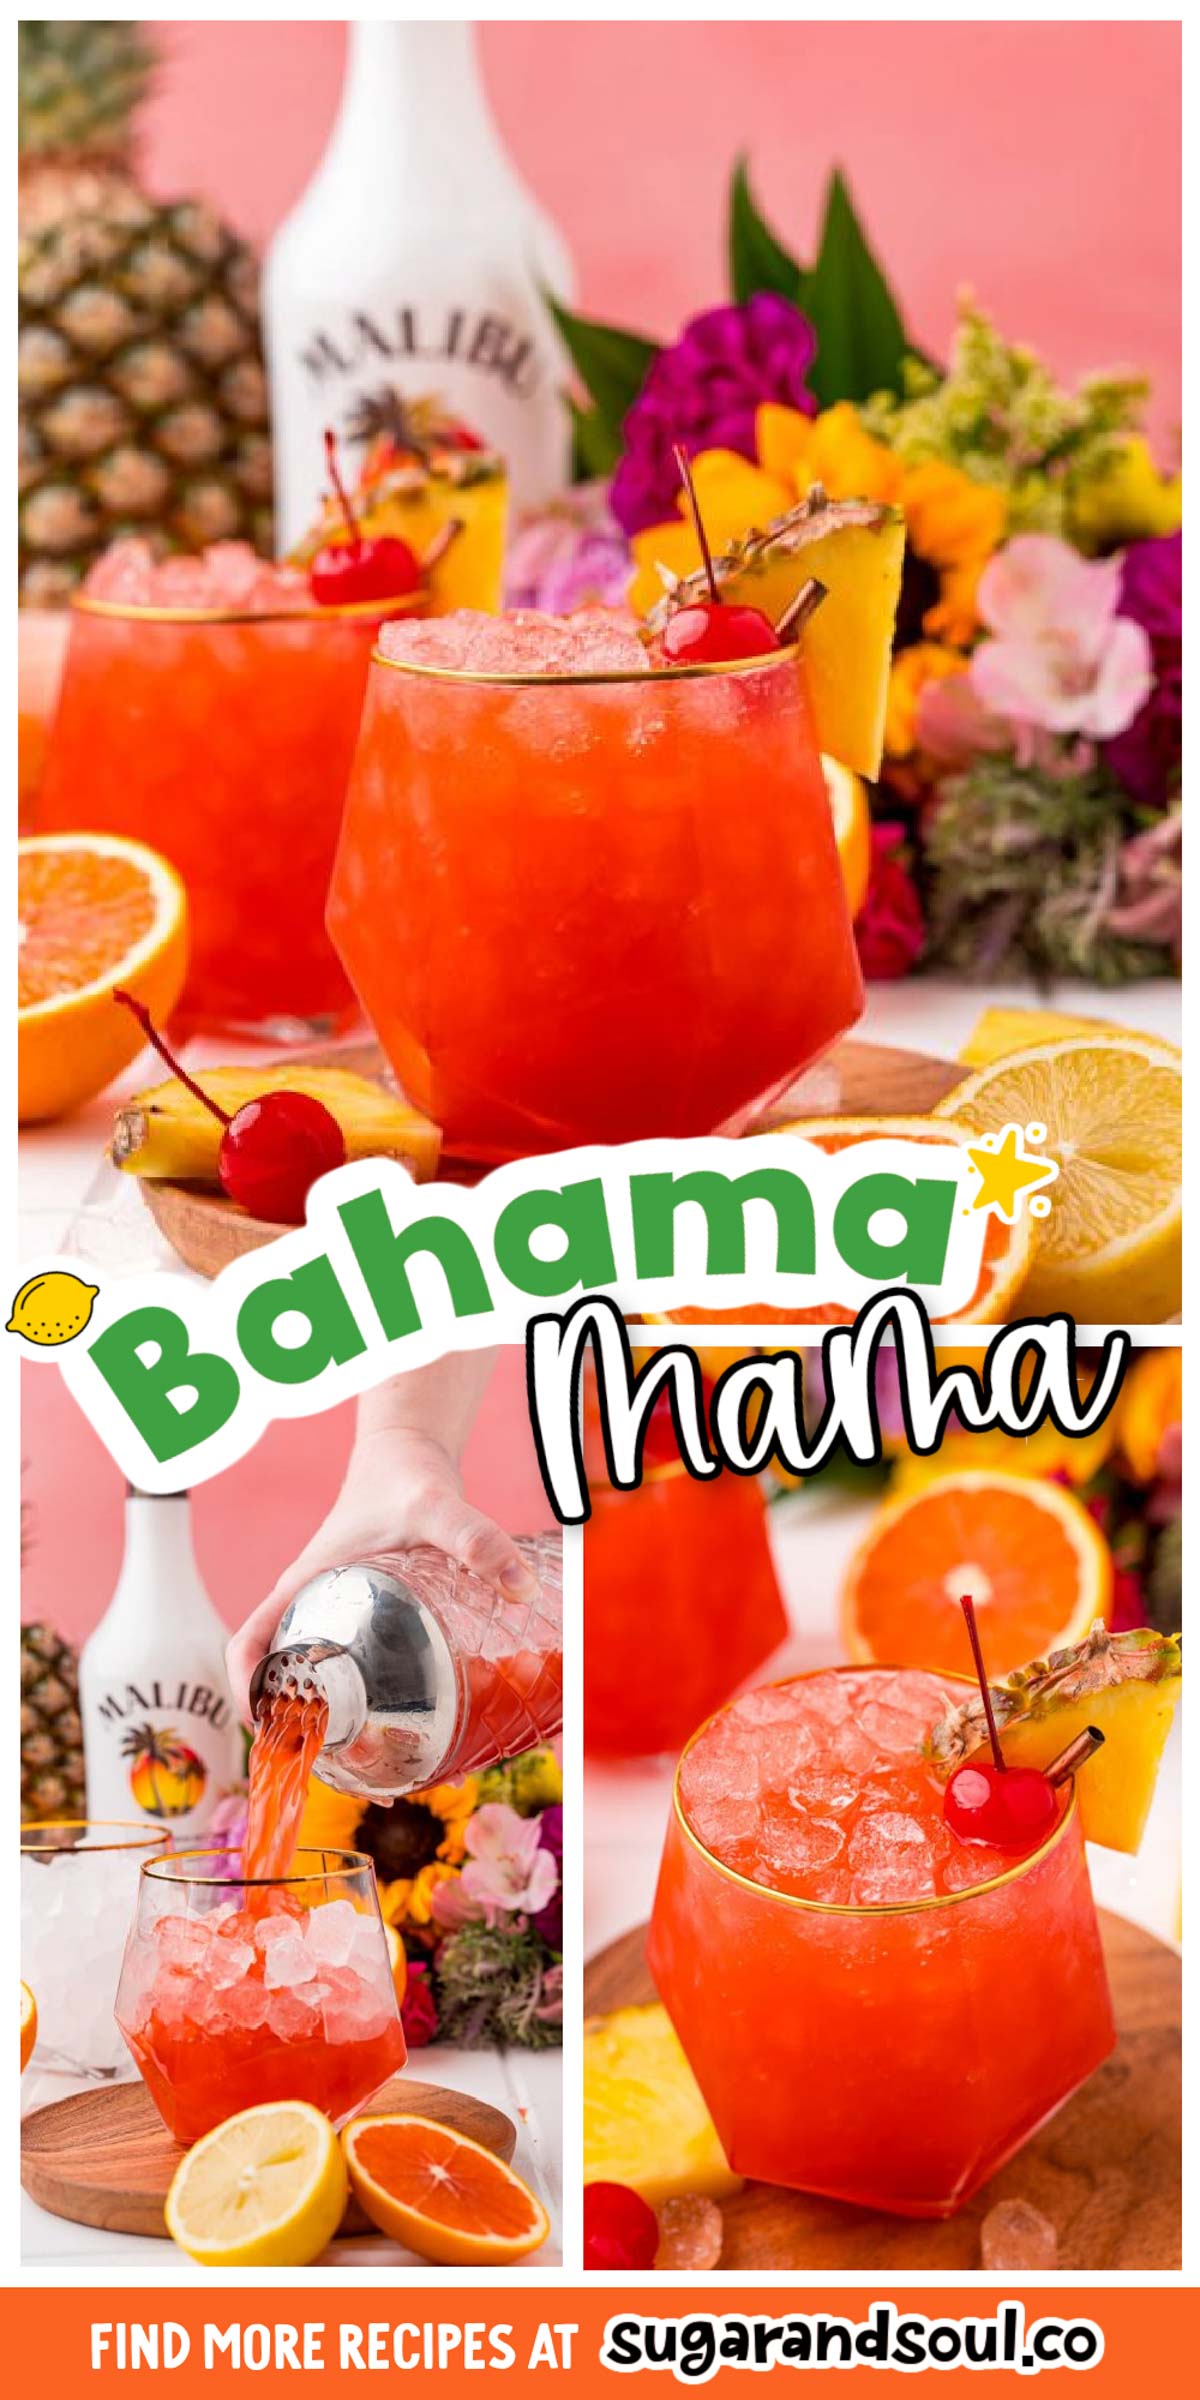 This Bahama Mama Cocktail is overflowing with tropical flavor that will have you dreaming of sunshine, summertime, and your favorite beach! Made with two kinds of rum, orange and pineapple juice, and grenadine for a flavor-packed island cocktail! via @sugarandsoulco